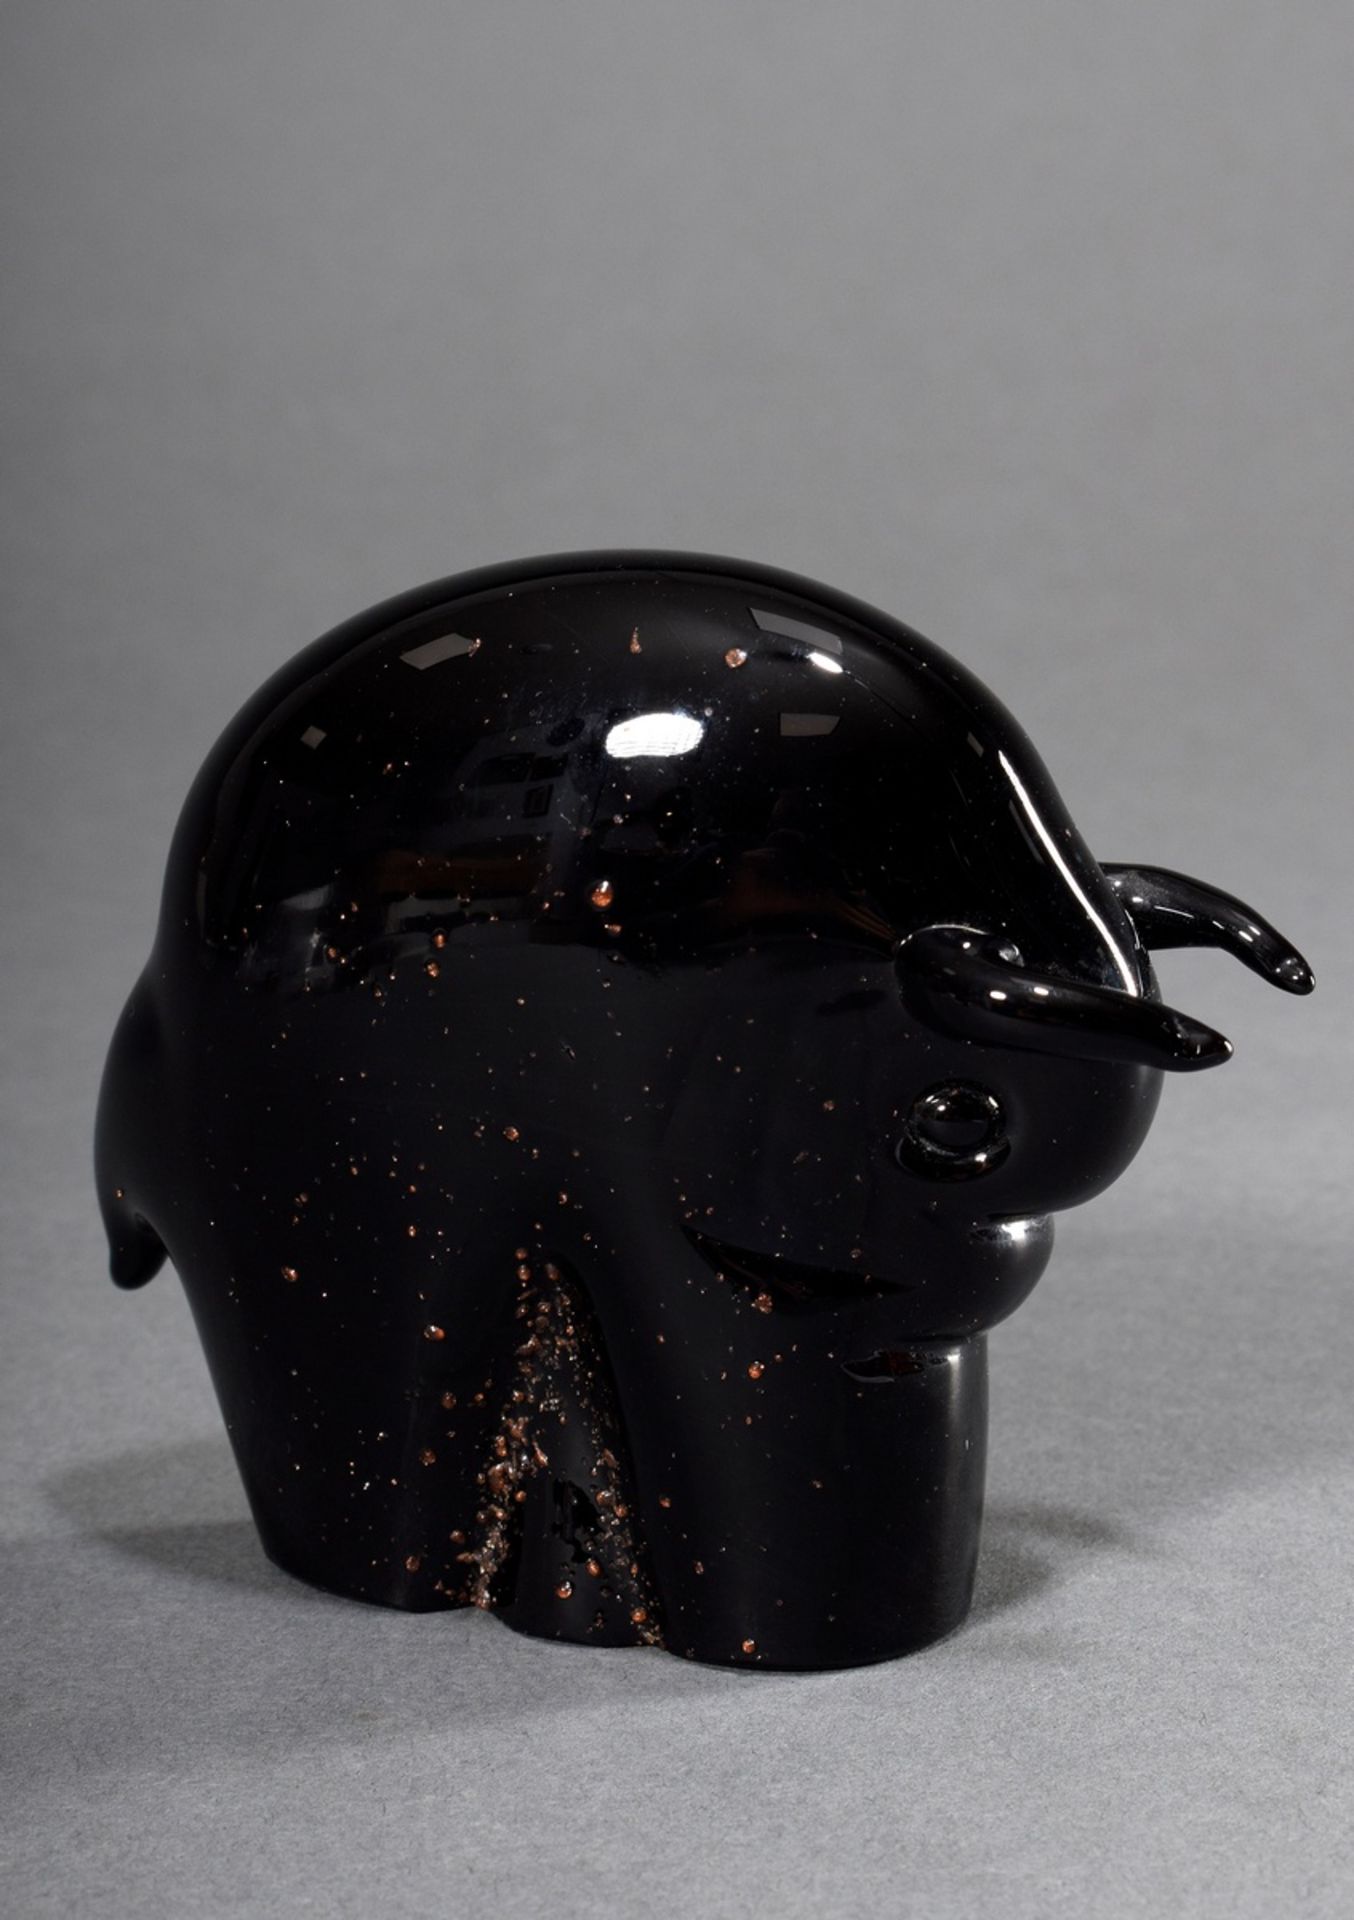 Murano glass "bull" with gold crumb melting, black glass, freely formed, pulled with tongs, probabl - Image 2 of 4